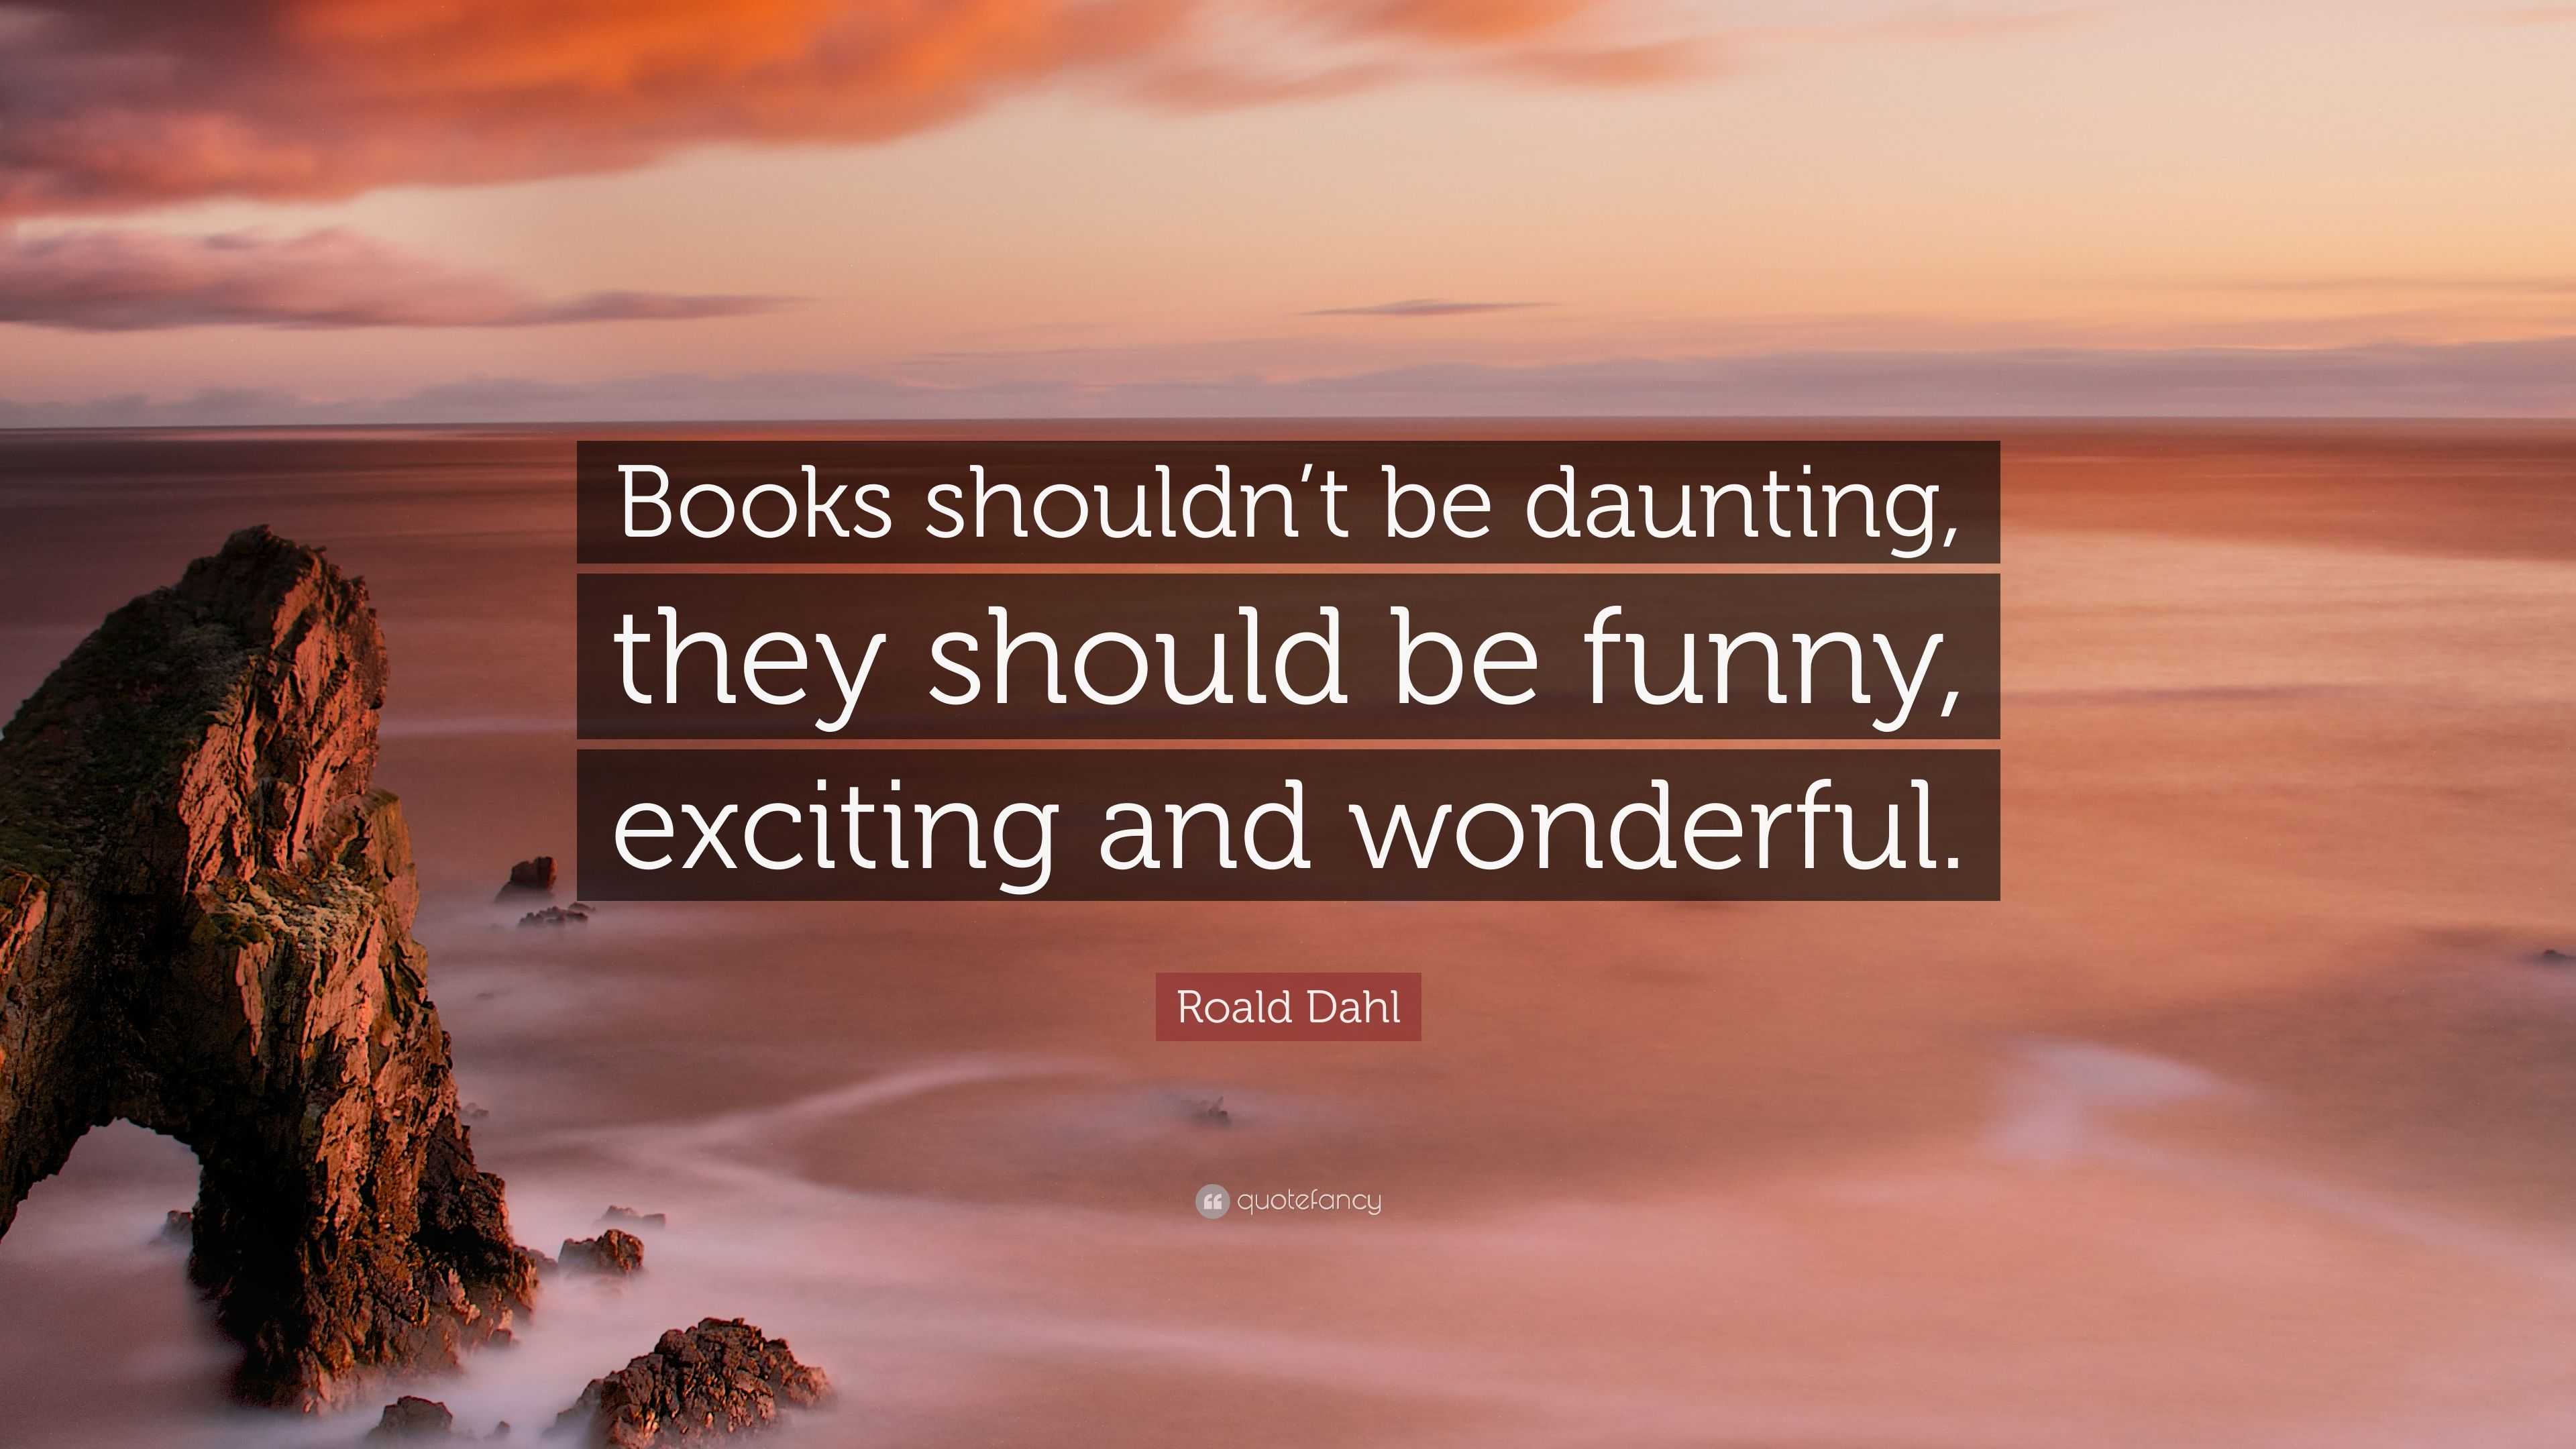 Roald Dahl Quote: “Books shouldn't be daunting, they should be funny,  exciting and wonderful.”